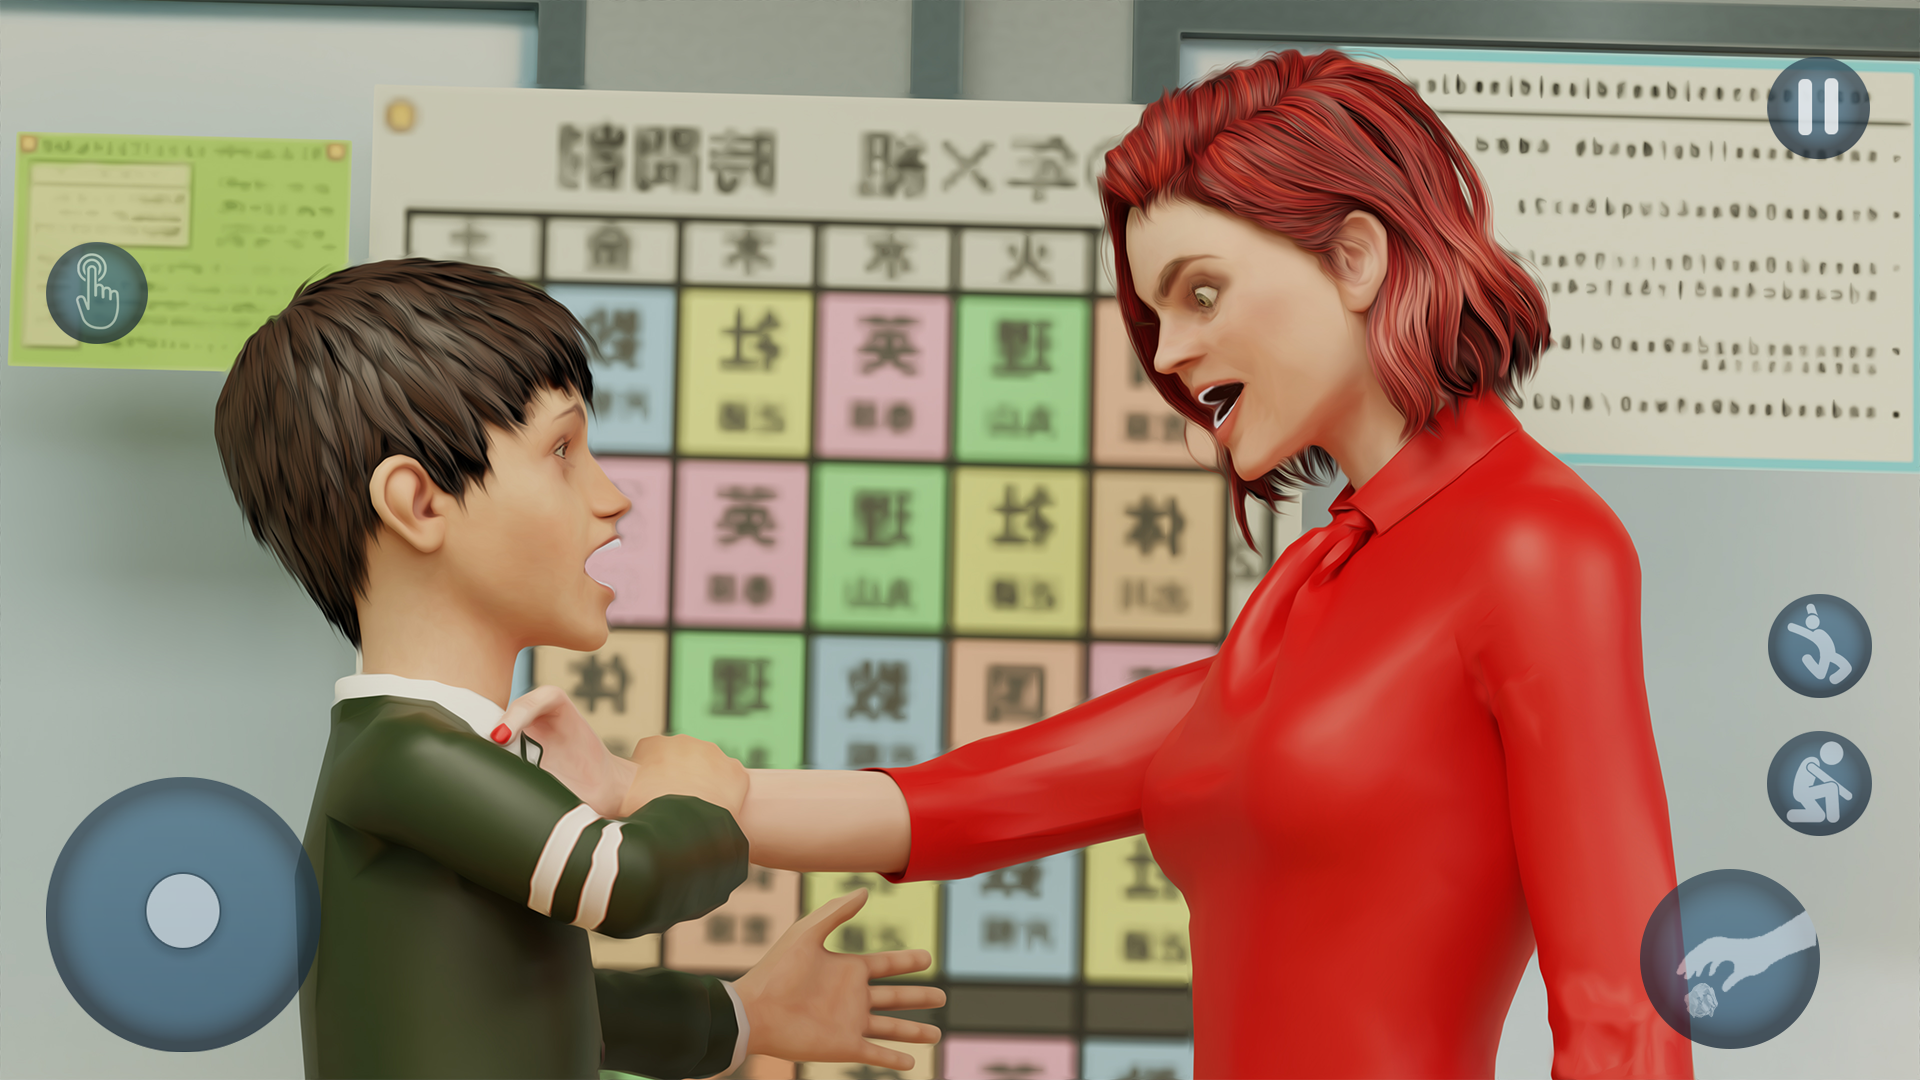 Hello Scary Evil Teacher 3D - New Spooky Games - APK Download for Android